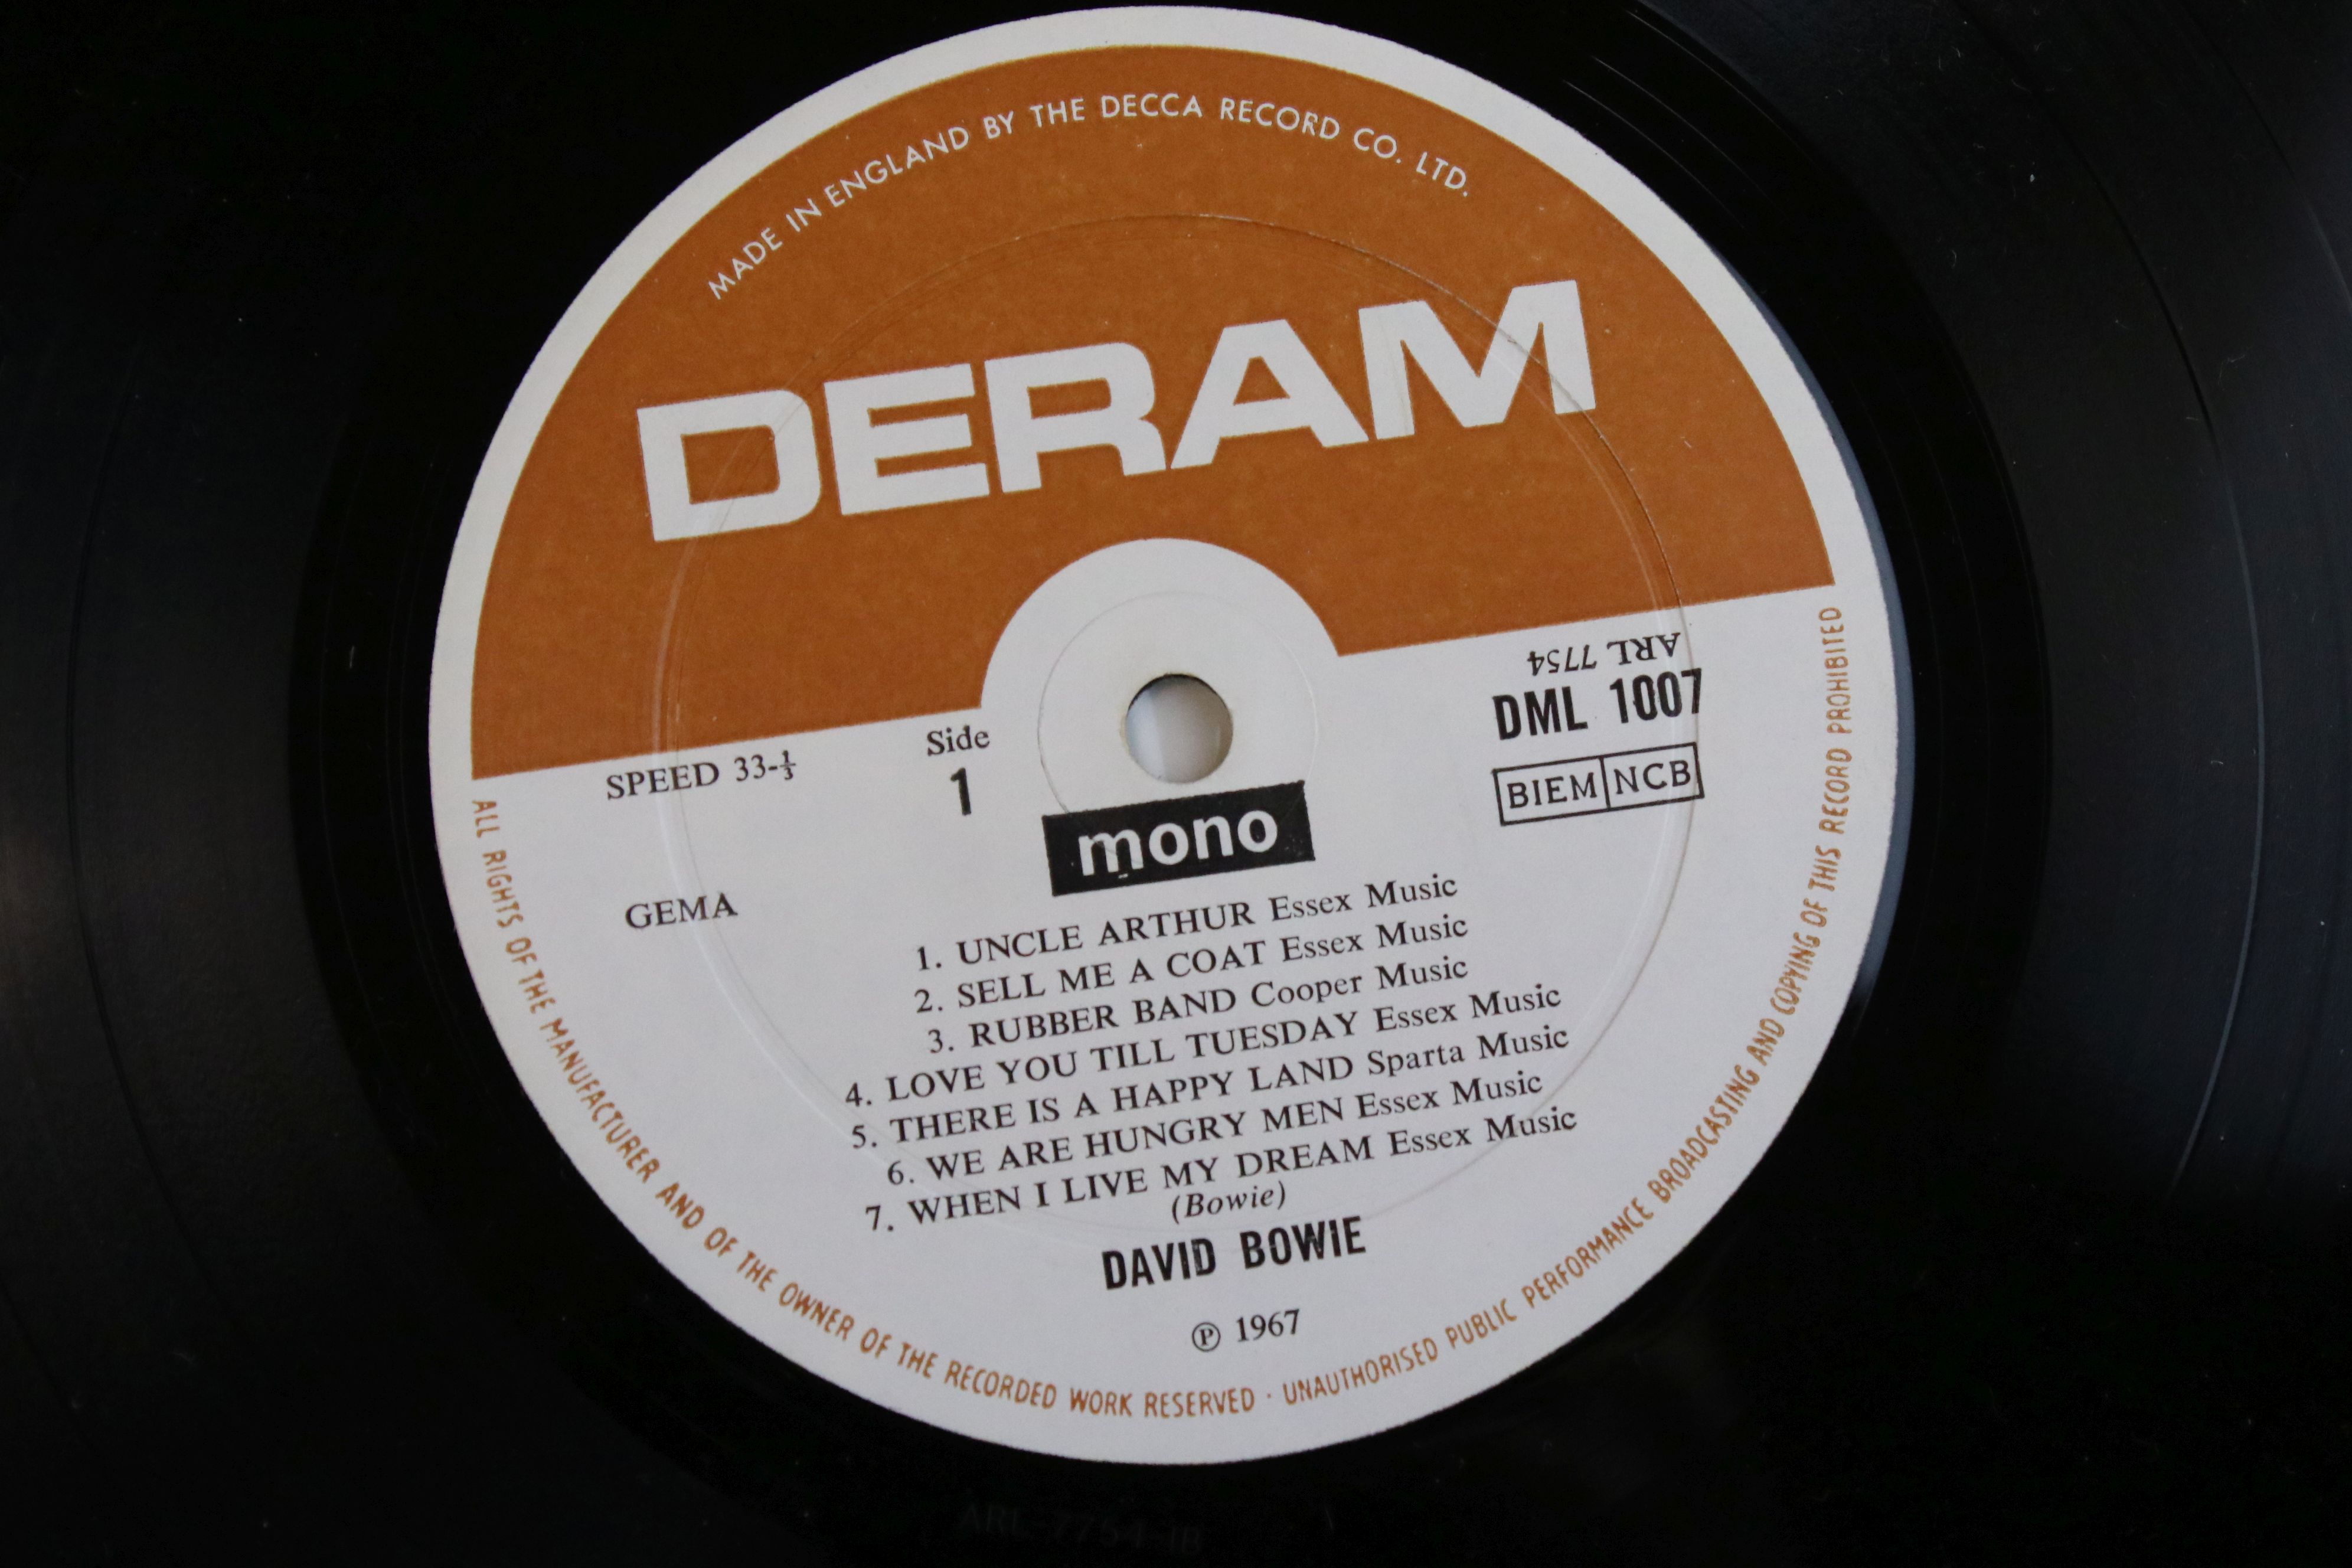 Vinyl - David Bowie Self Titled on Deram (DML 1007) mono, laminated front cover. Matrices 7754 1B - Image 2 of 6